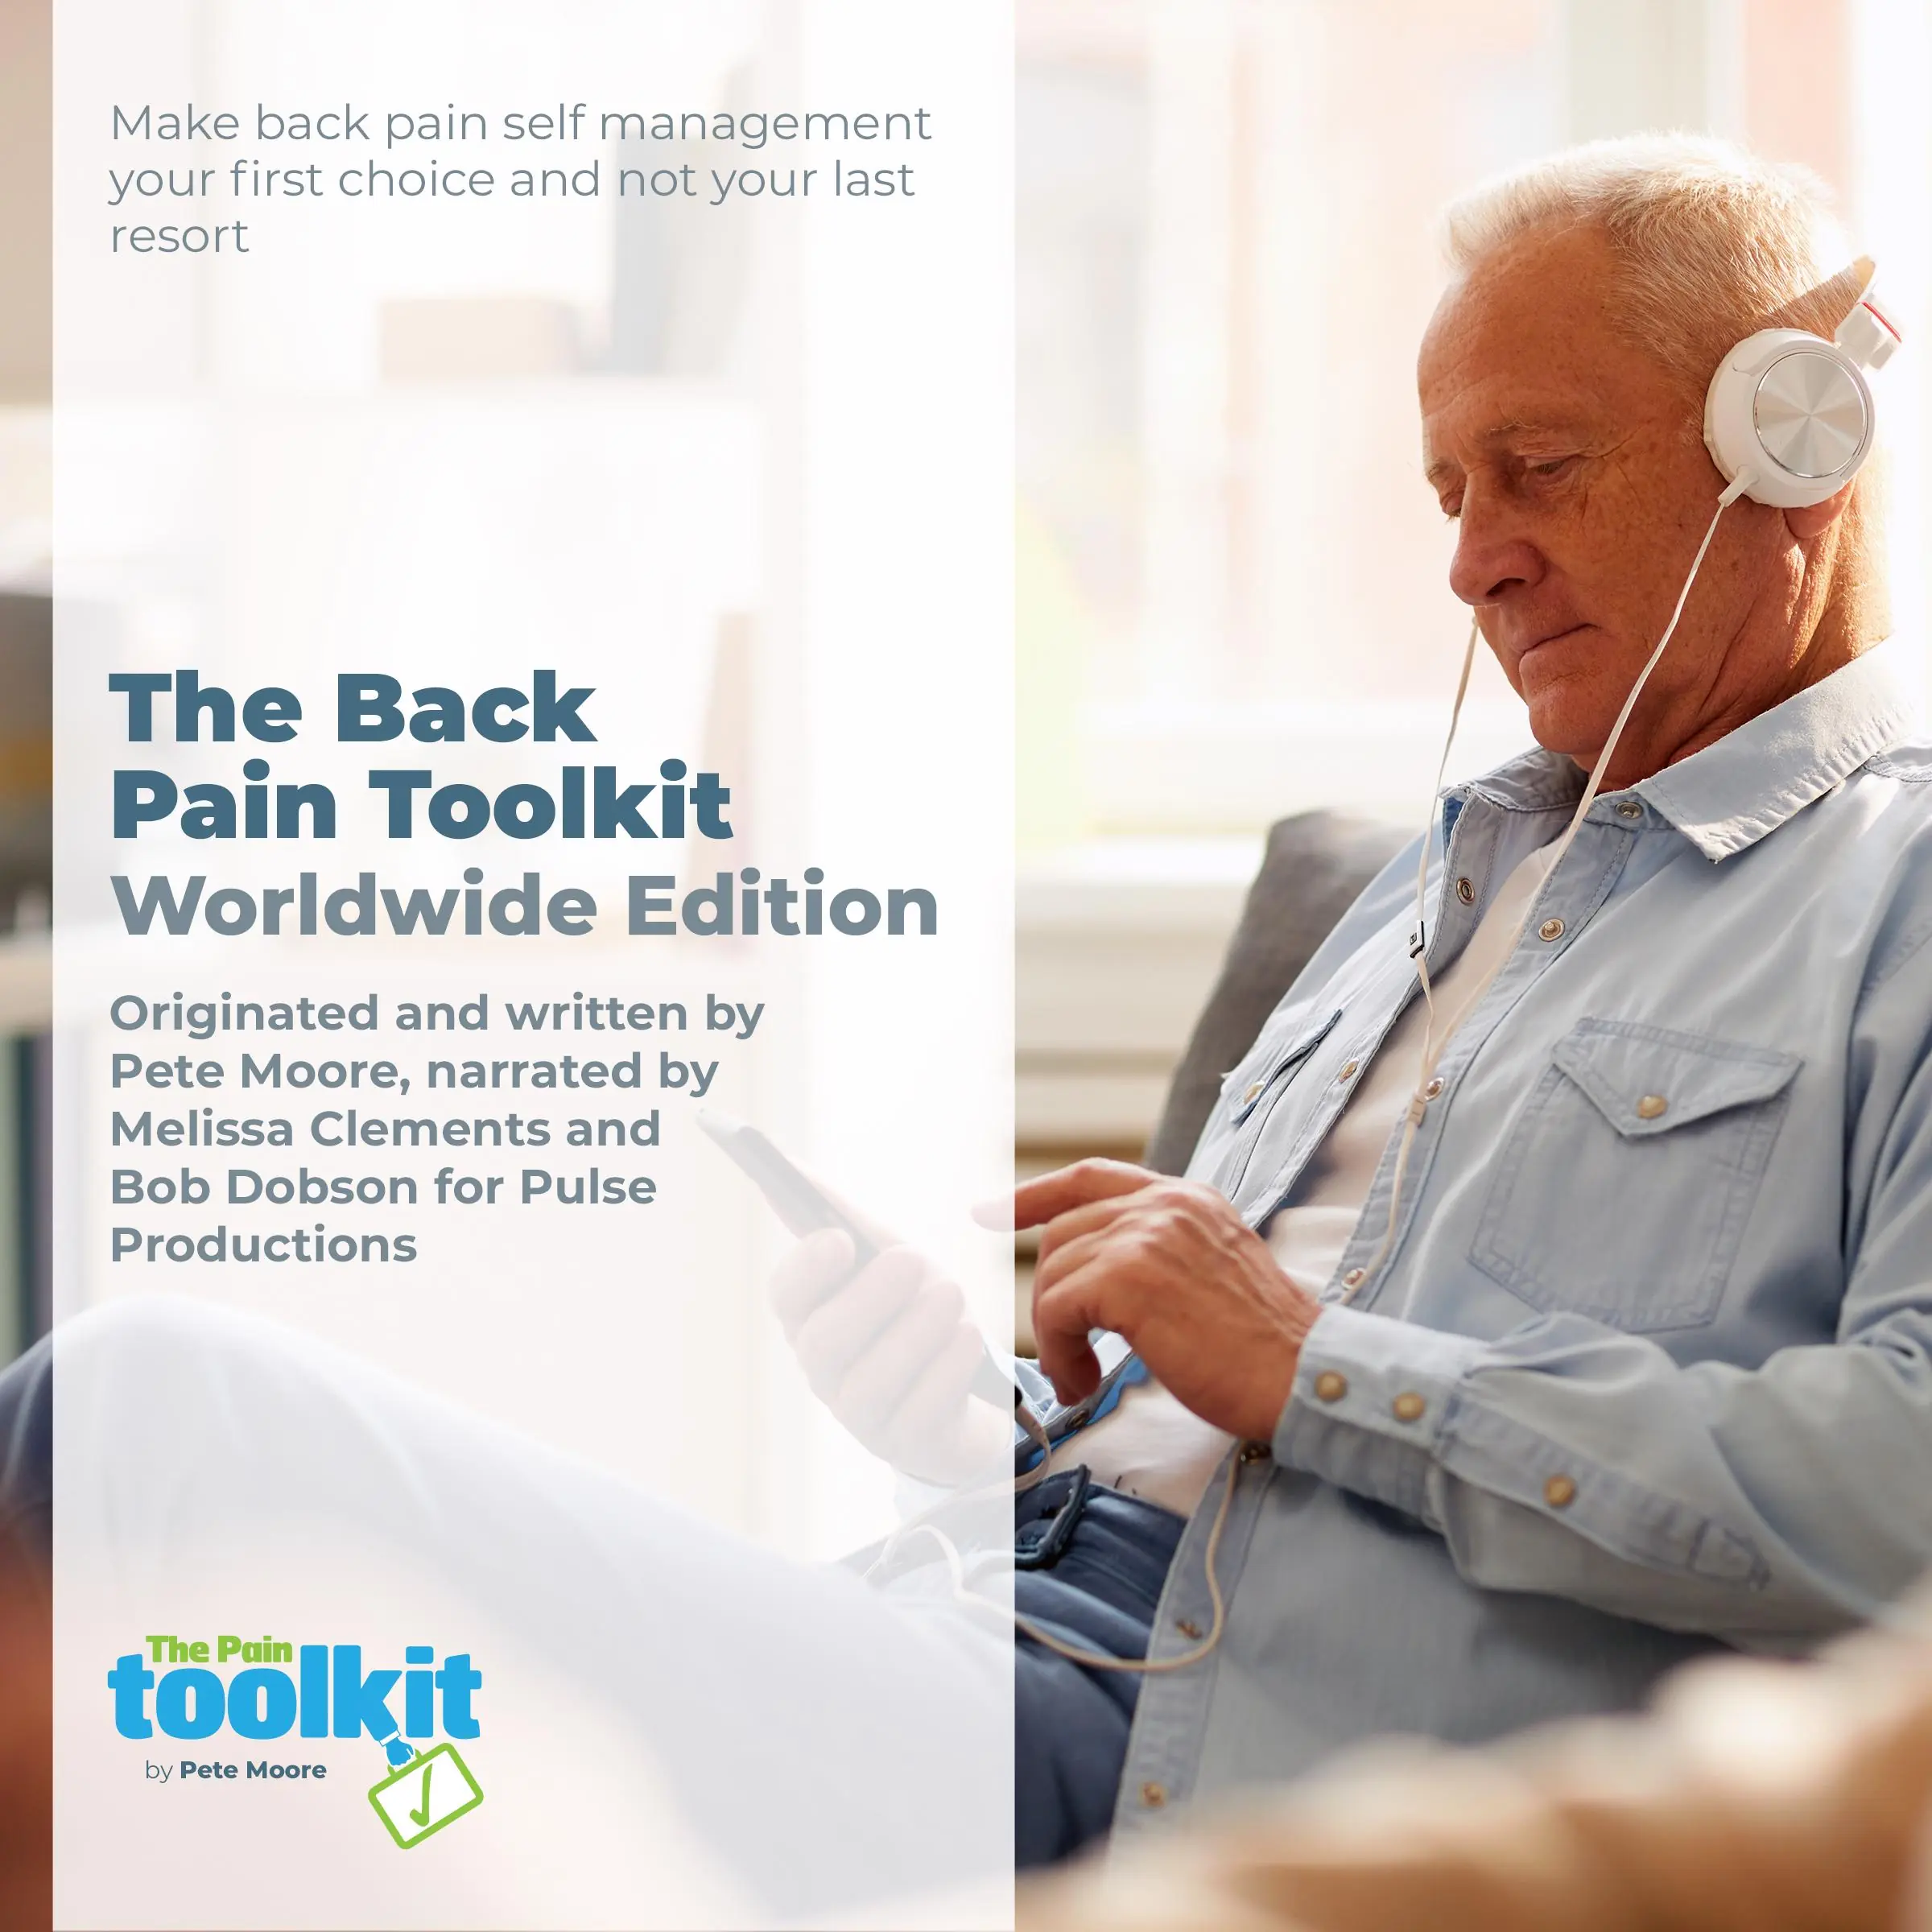 The Back Pain Toolkit Worldwide Edition Audiobook by Pete Moore